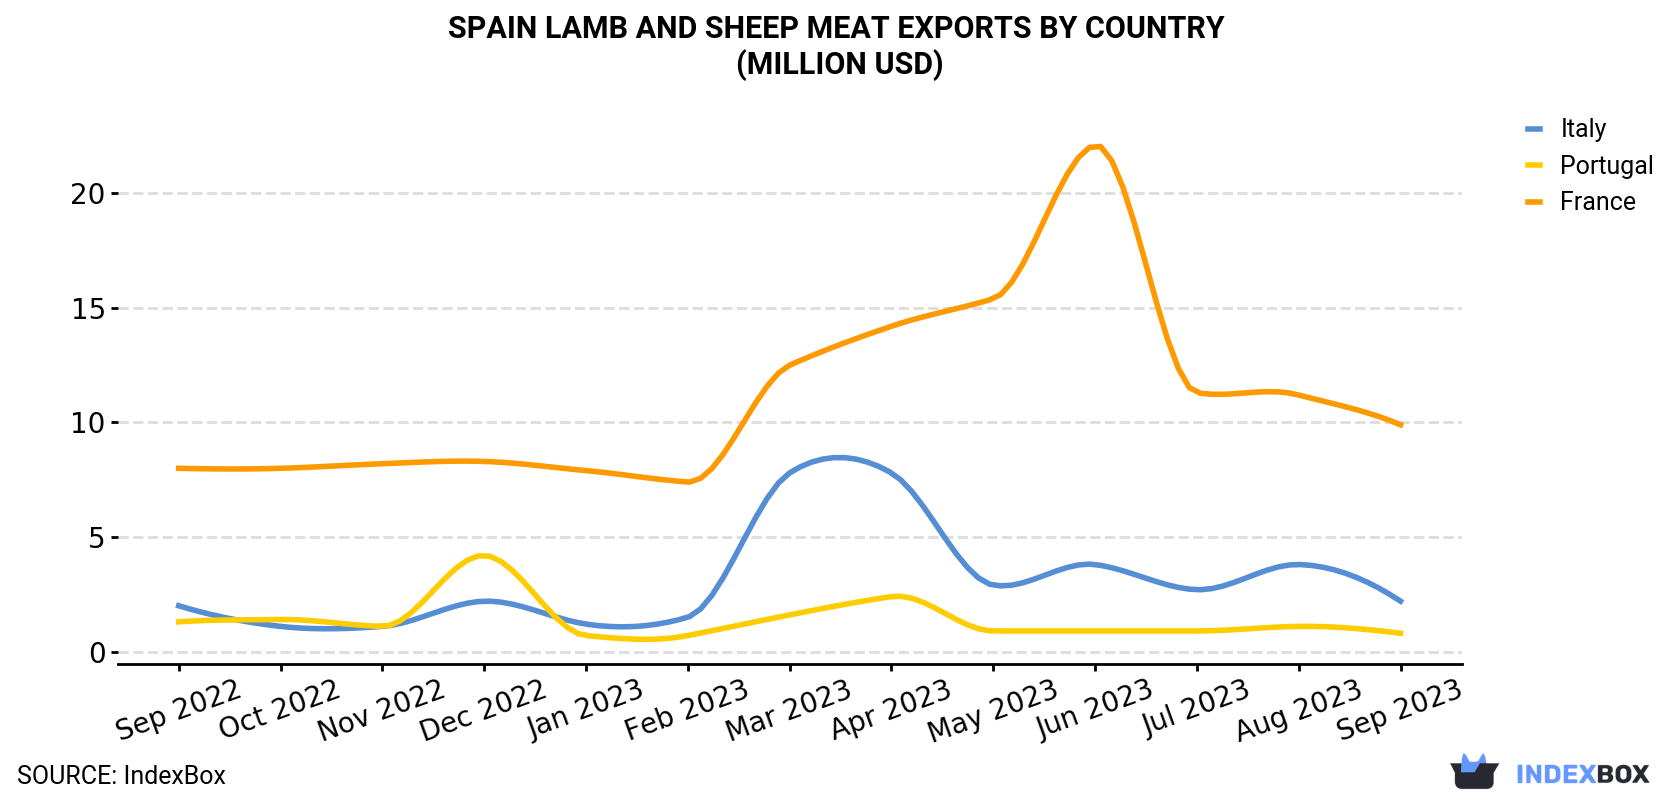 Spain Lamb and Sheep Meat Exports By Country (Million USD)